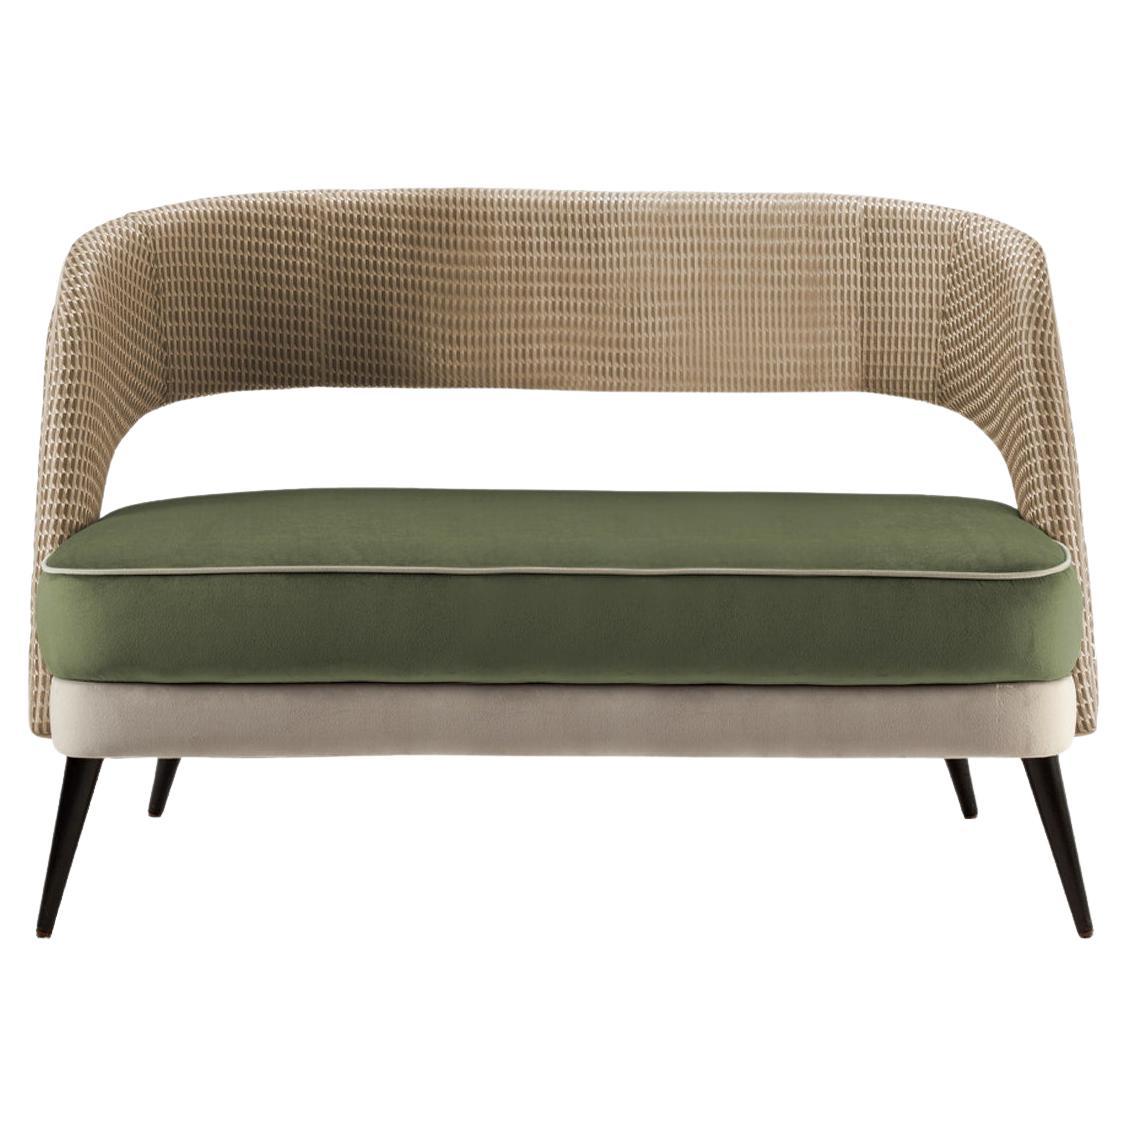 Ava Settee 2-Seat Olive Green Seat and Textured Fabric Backrest Wooden Feet